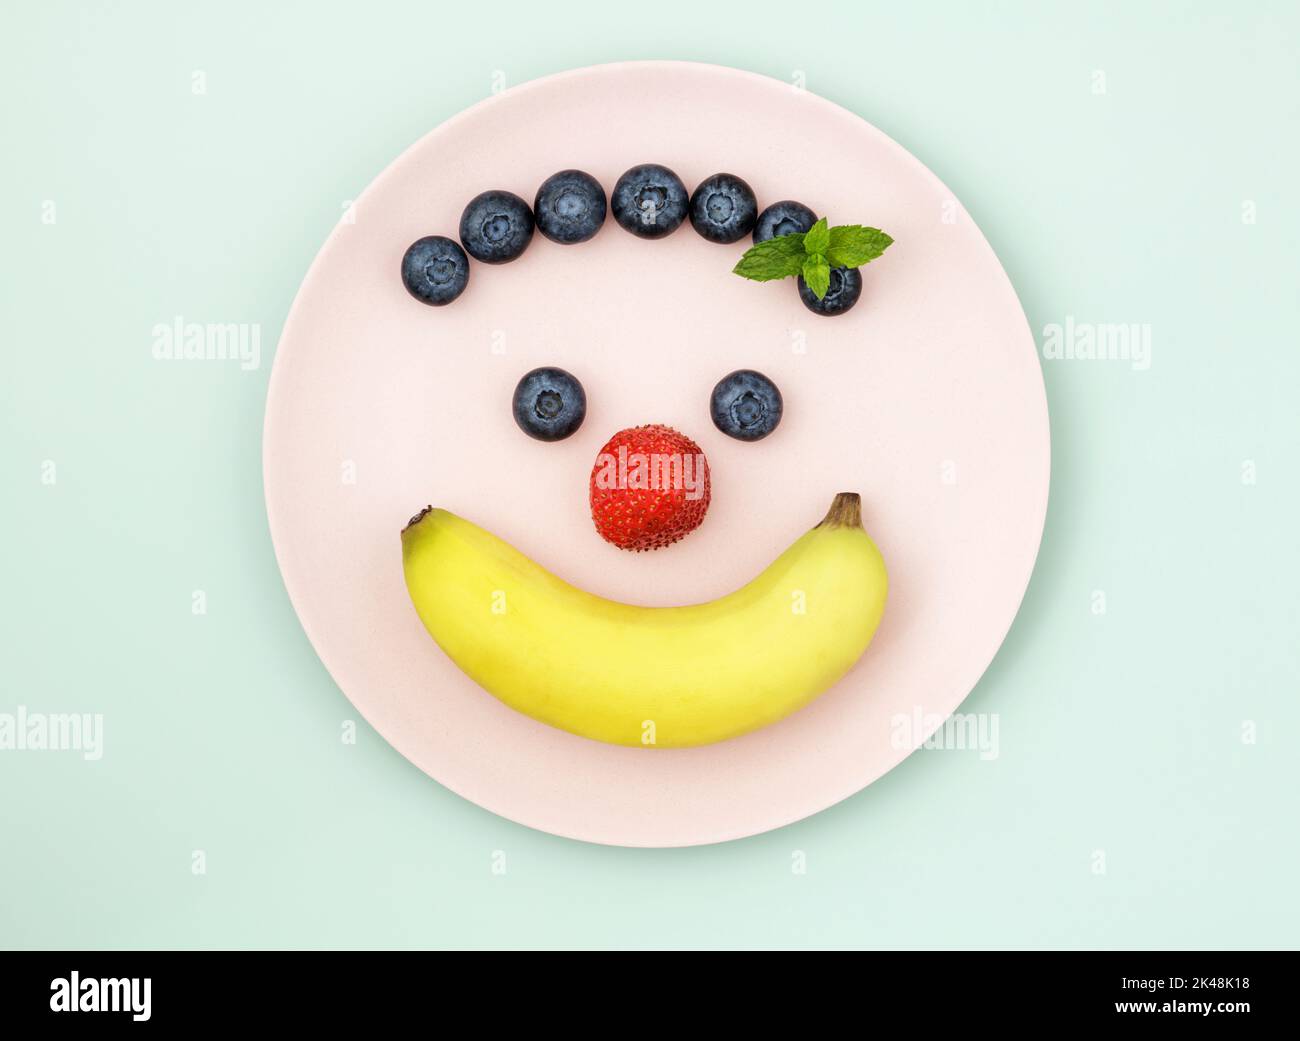 Banana and berries on pink plate arranged in the shape of a happy face Stock Photo